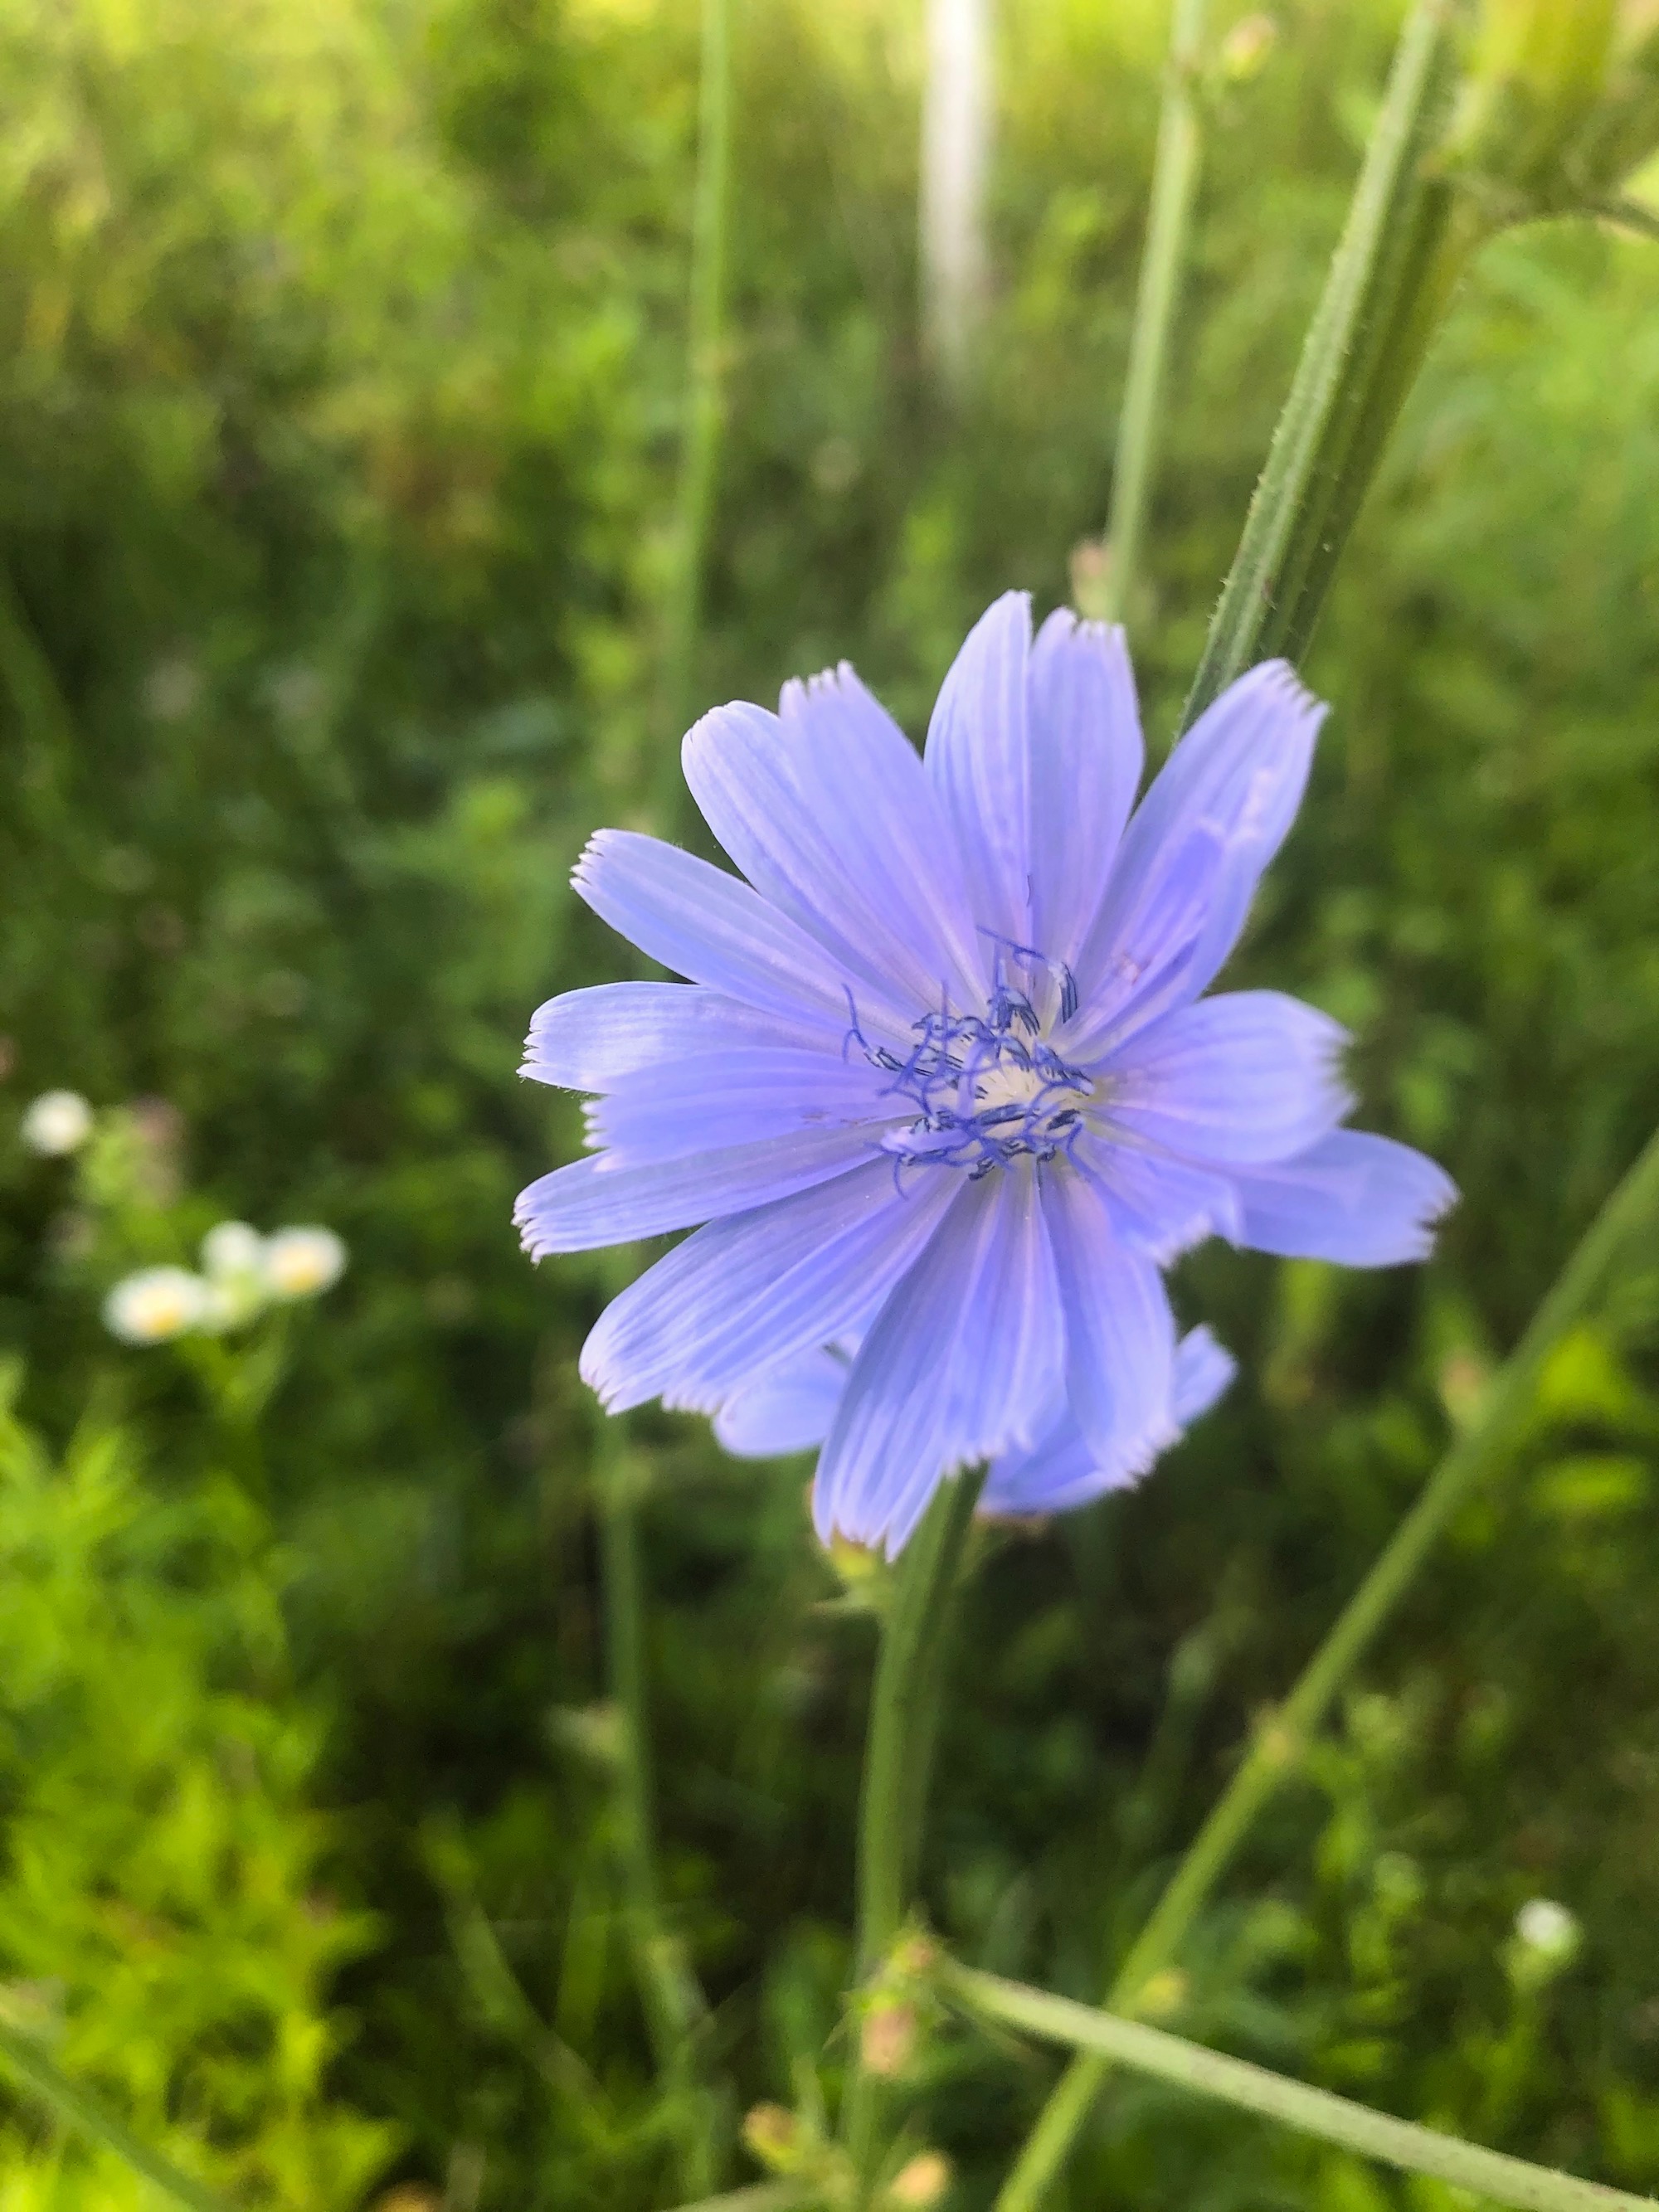 Chicory in Marion Dunn Prairie in Madison, Wisconsin on June 27, 2020.